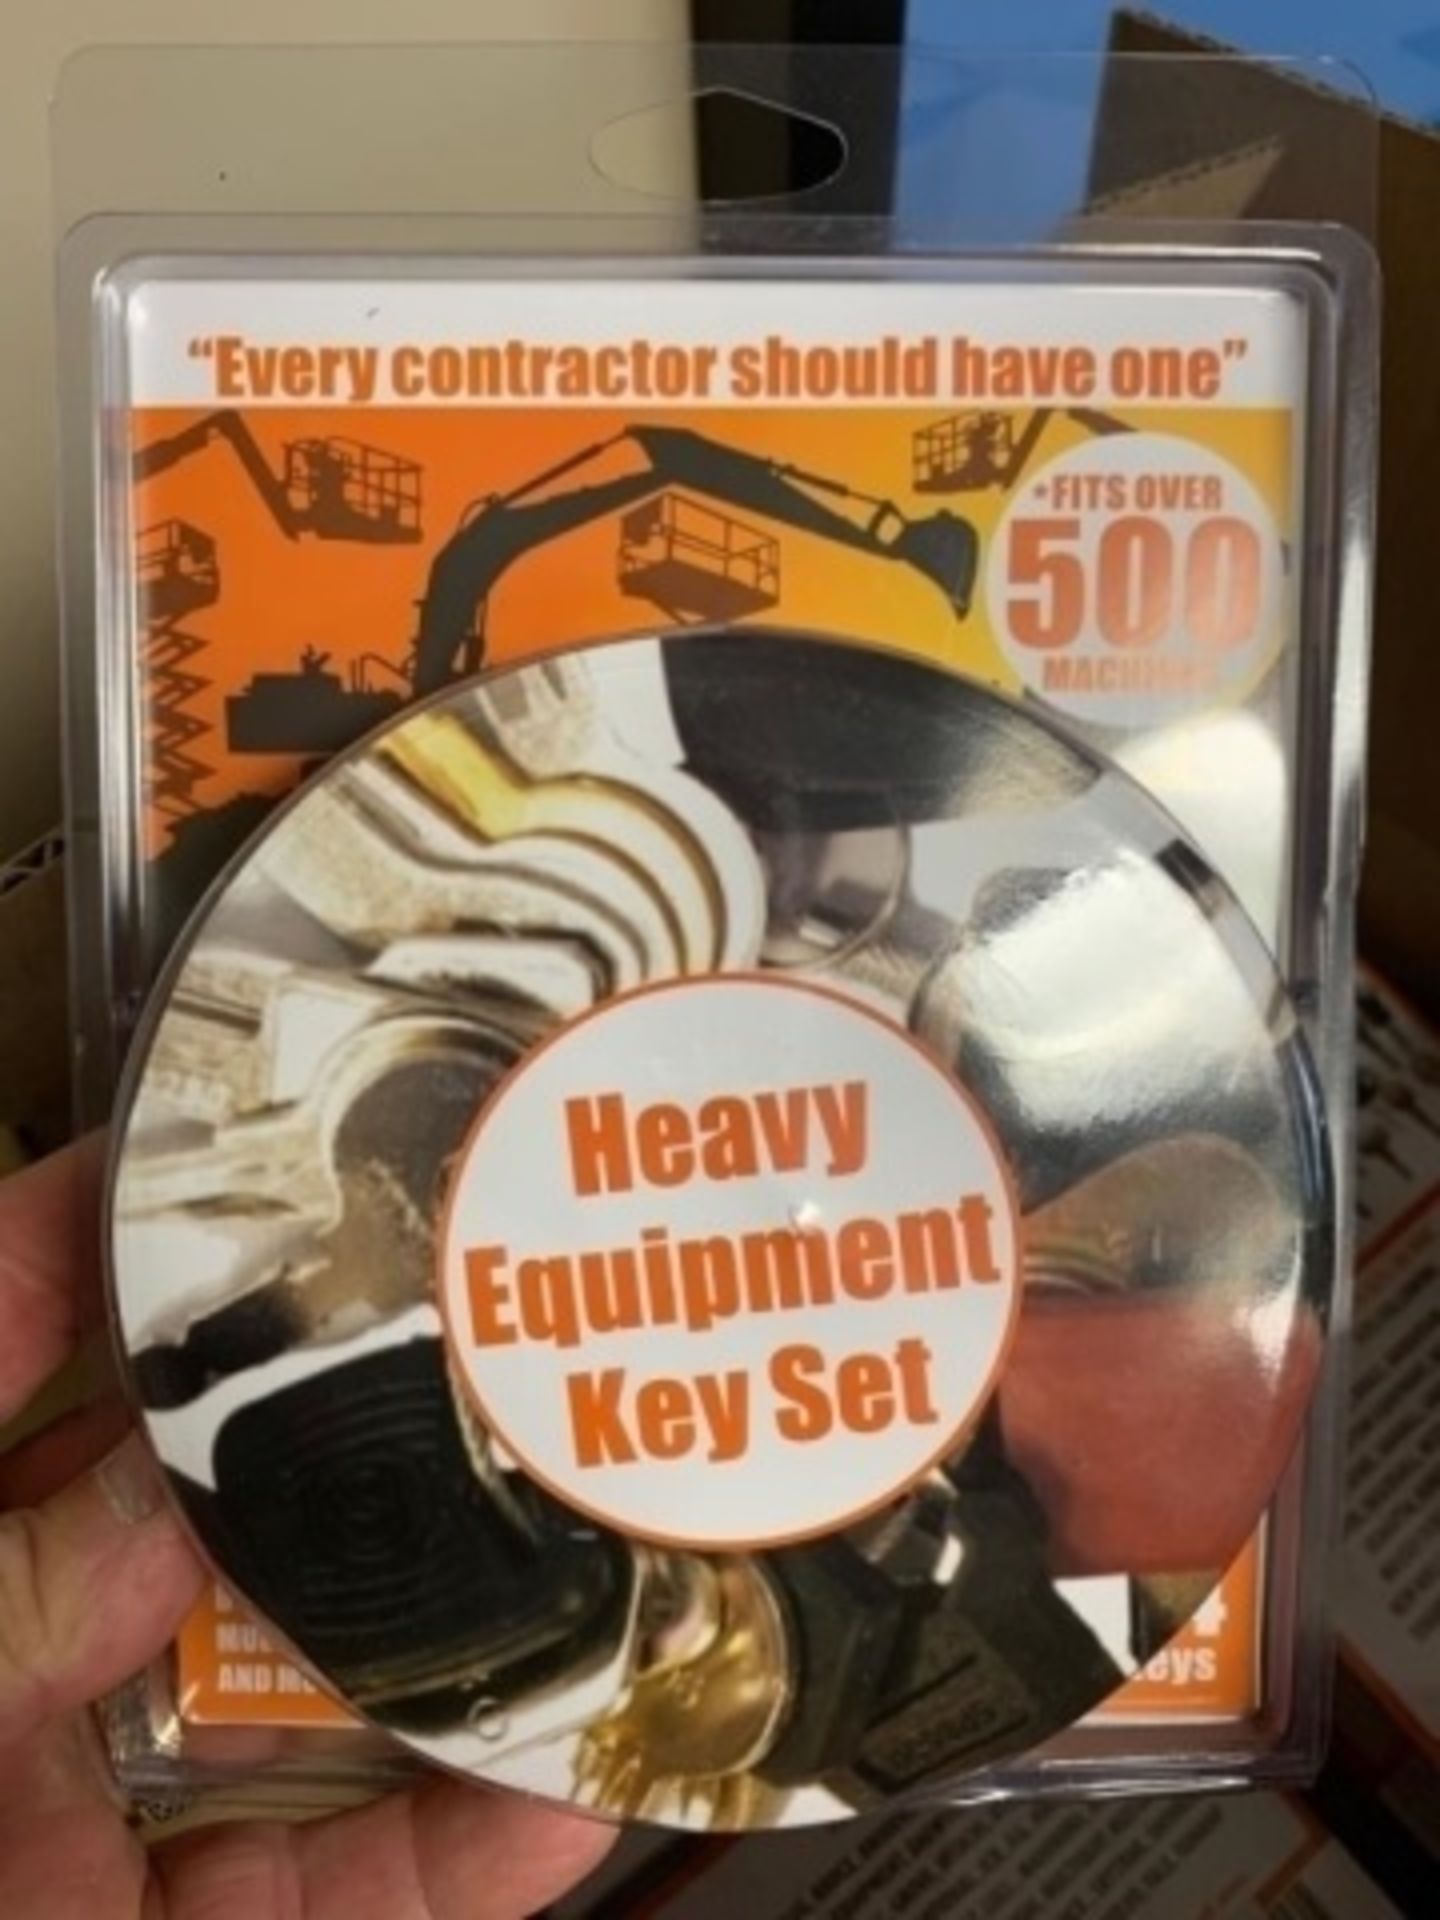 New Unused Heavy Equipment 24-Key Set, Fits Over 500 Different Machines - Image 2 of 8